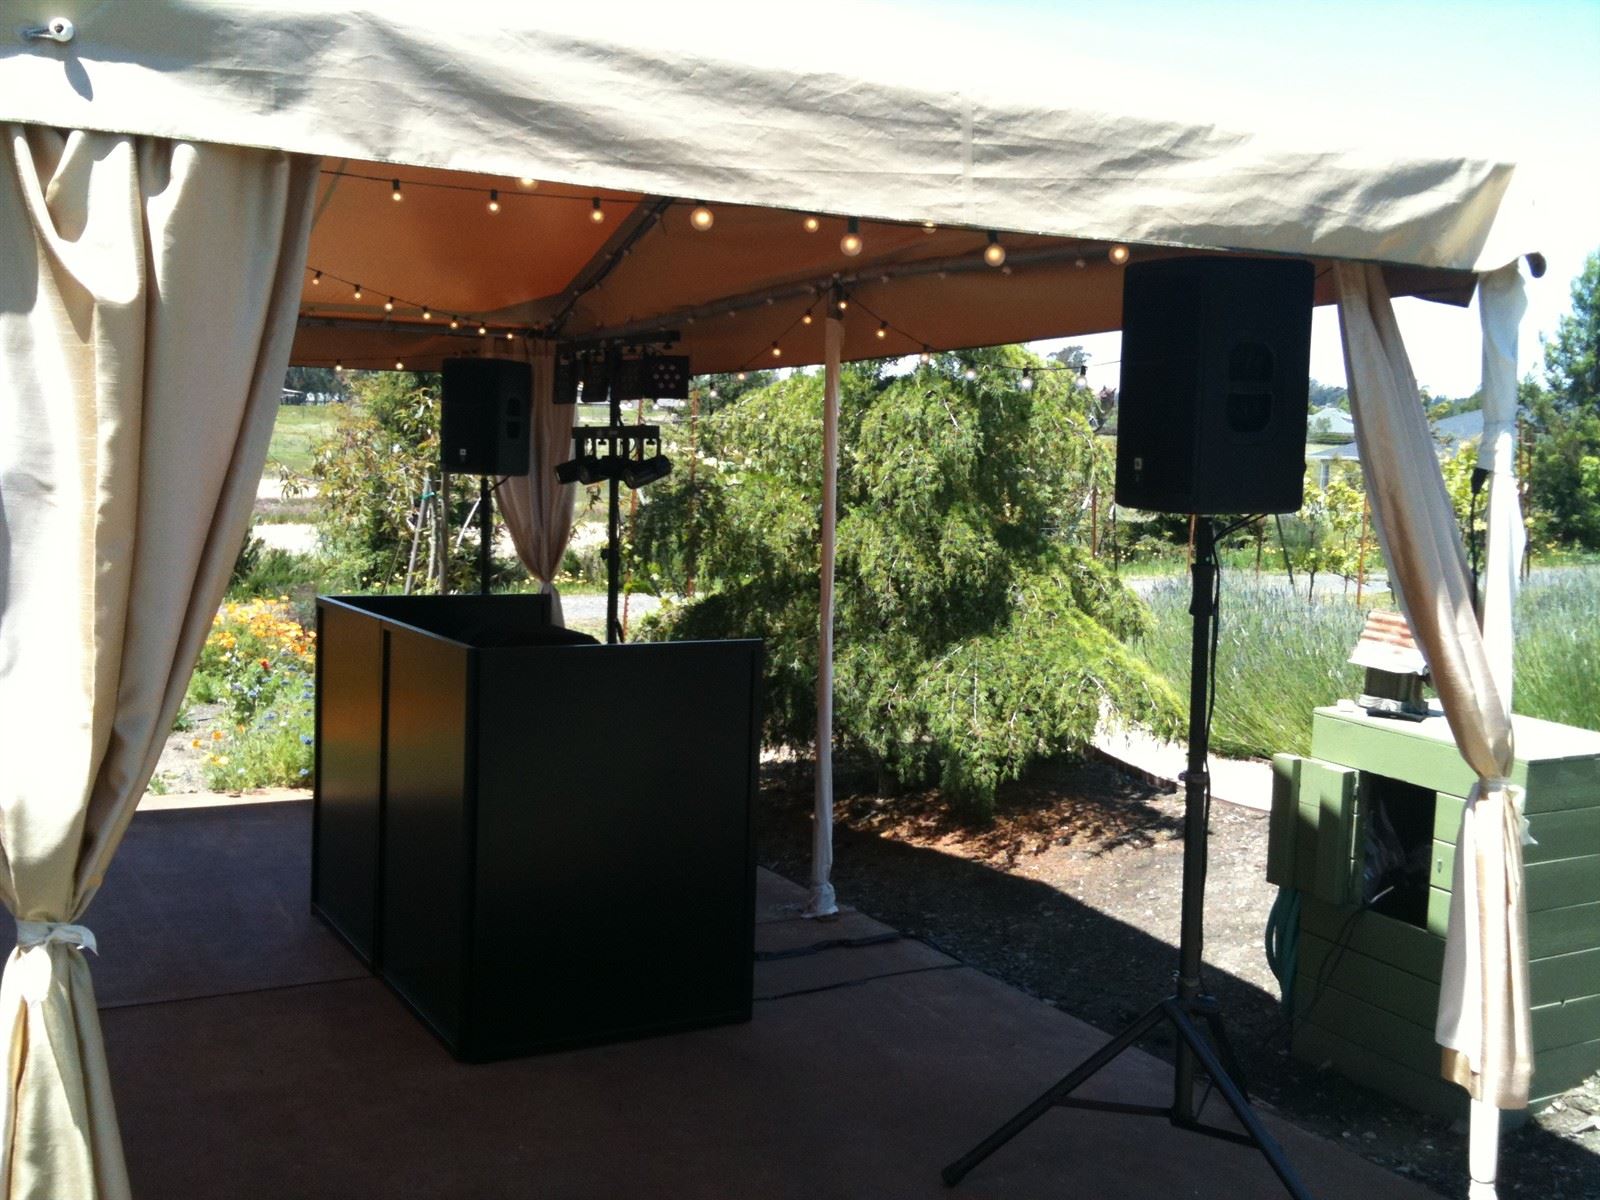 Sova Gardens Wedding - Runaway DJ and Events : You won't see a ton of wires and things hanging from our equipment. We like it tight and clean!